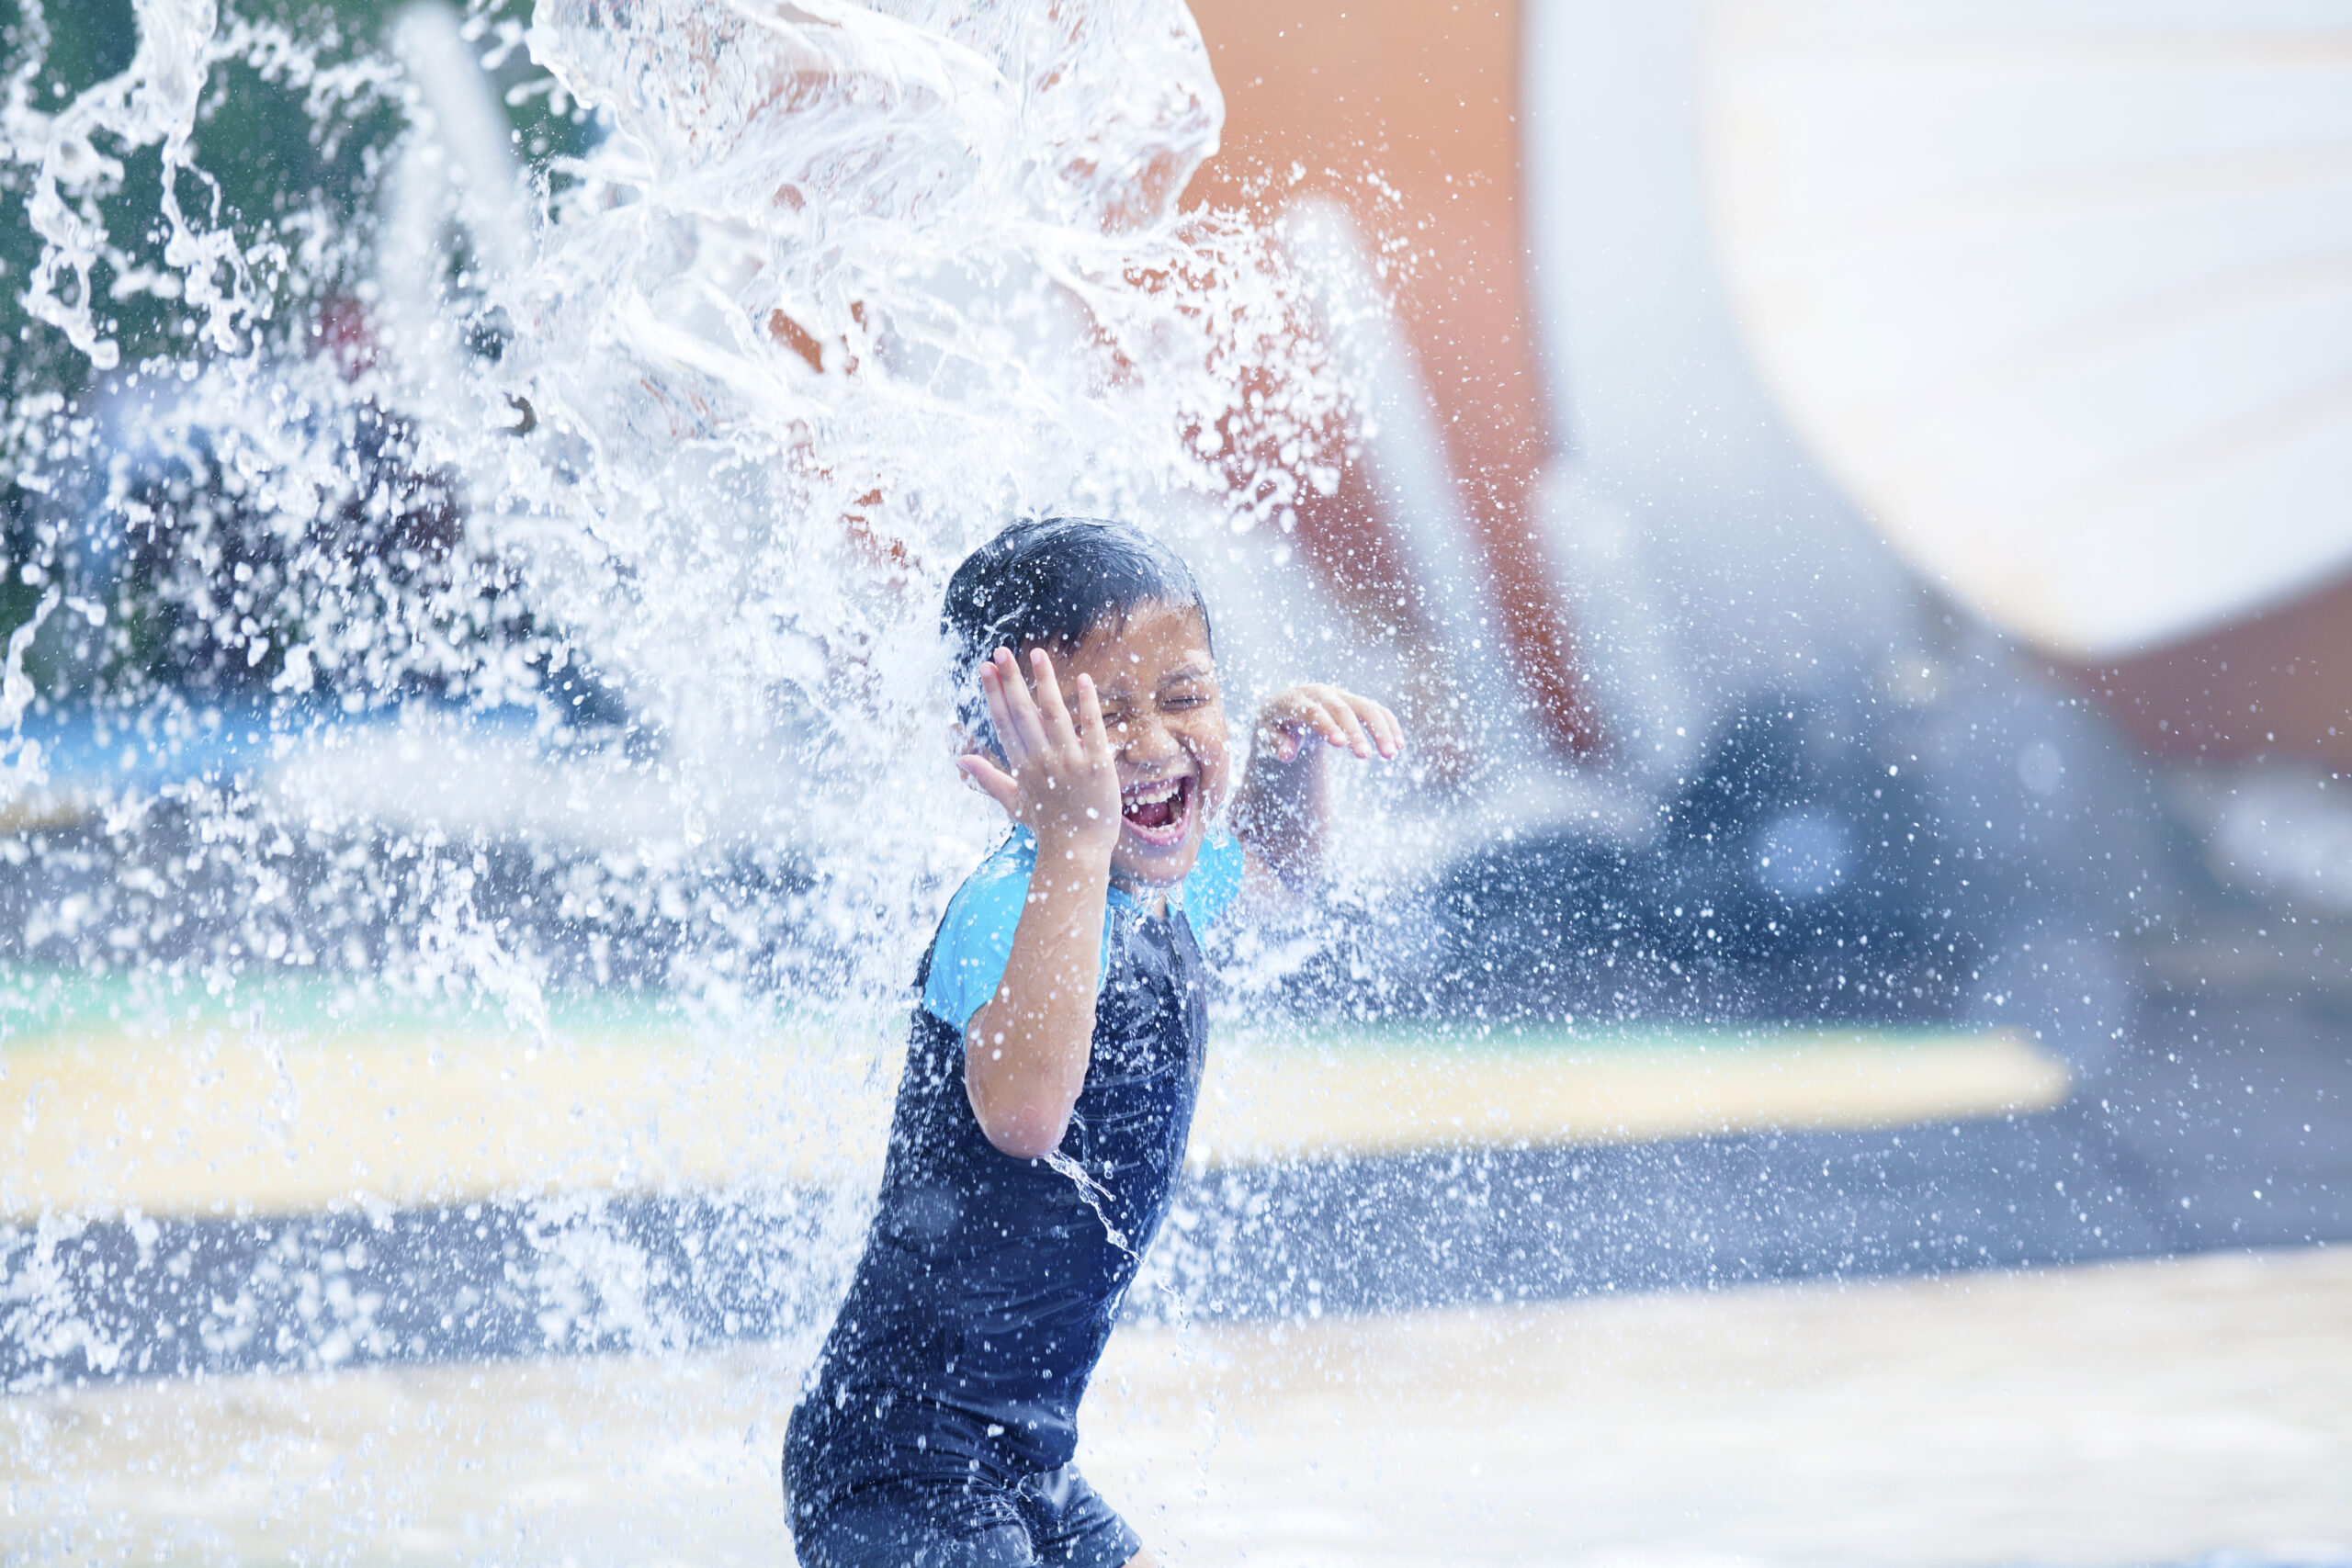 Young boy playing in a pool fountain